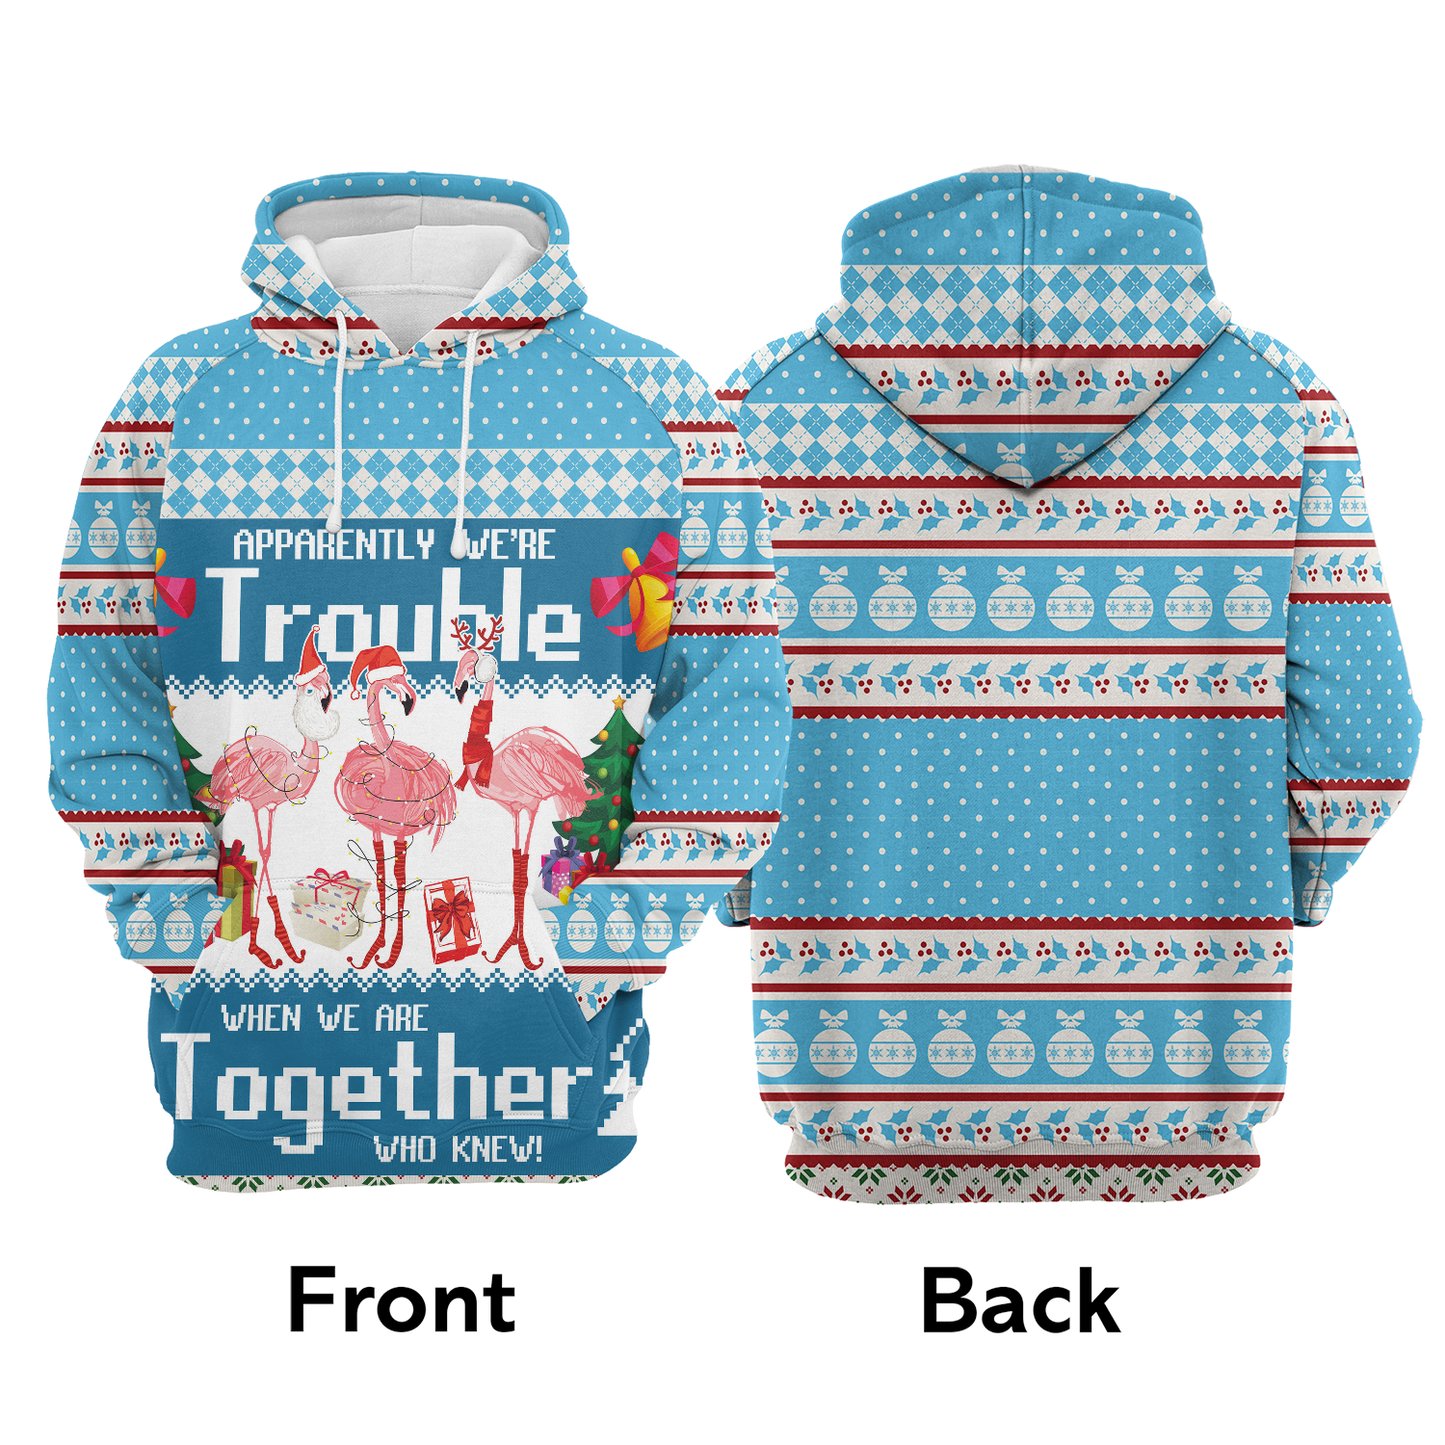 Flamingo Trouble Together All Over Print Unisex Hoodie